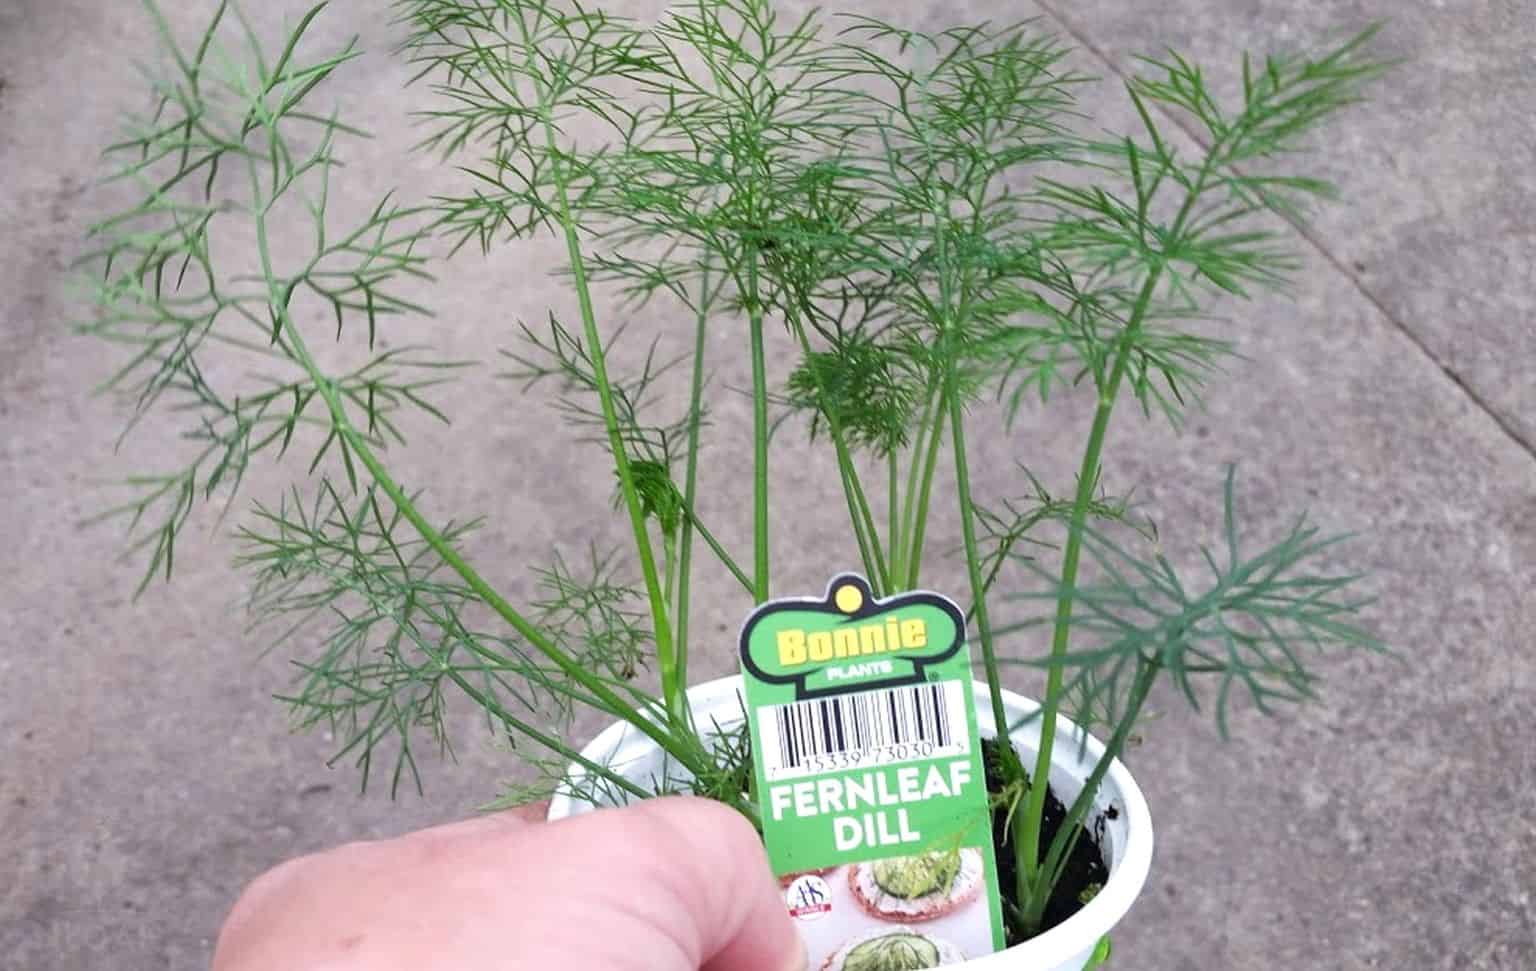 dill plant in pot next to seed packet